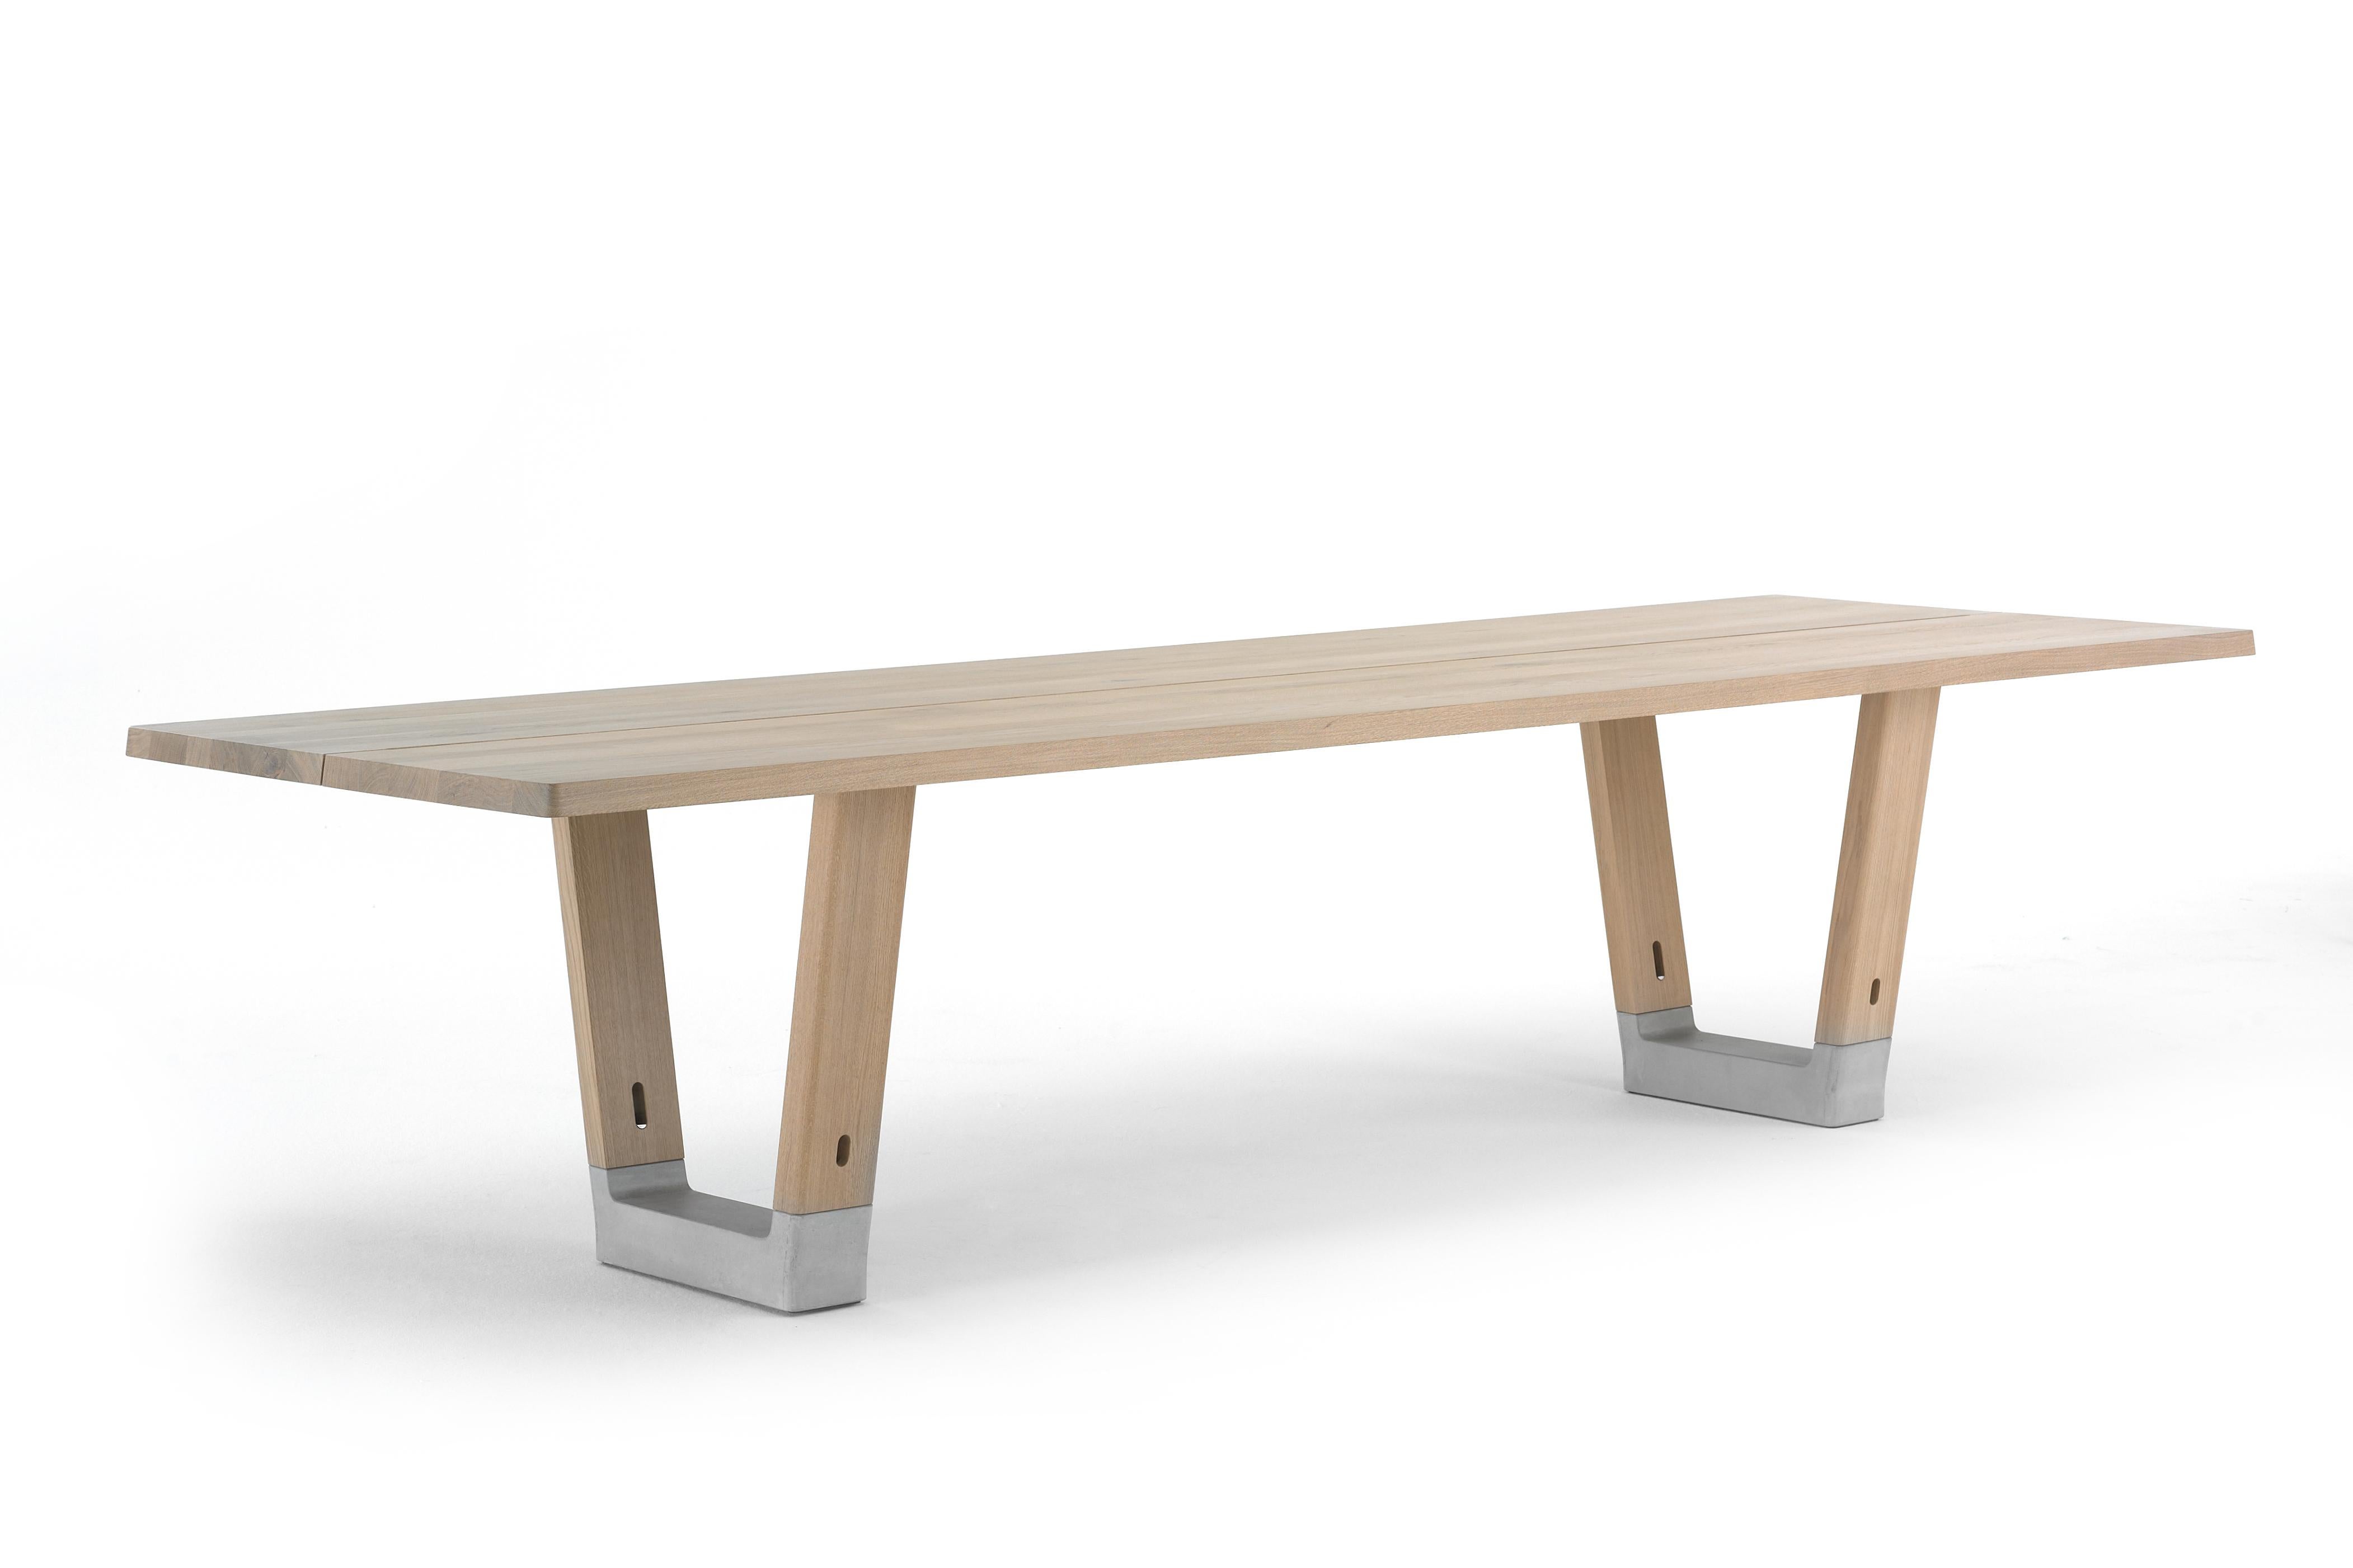 The name says it all: a basic furnishing. A robust, no-nonsense table made of solid wood and concrete - durable materials that can take a knock. A table that you know the next generation will be sitting at and enjoying. The base is the first product